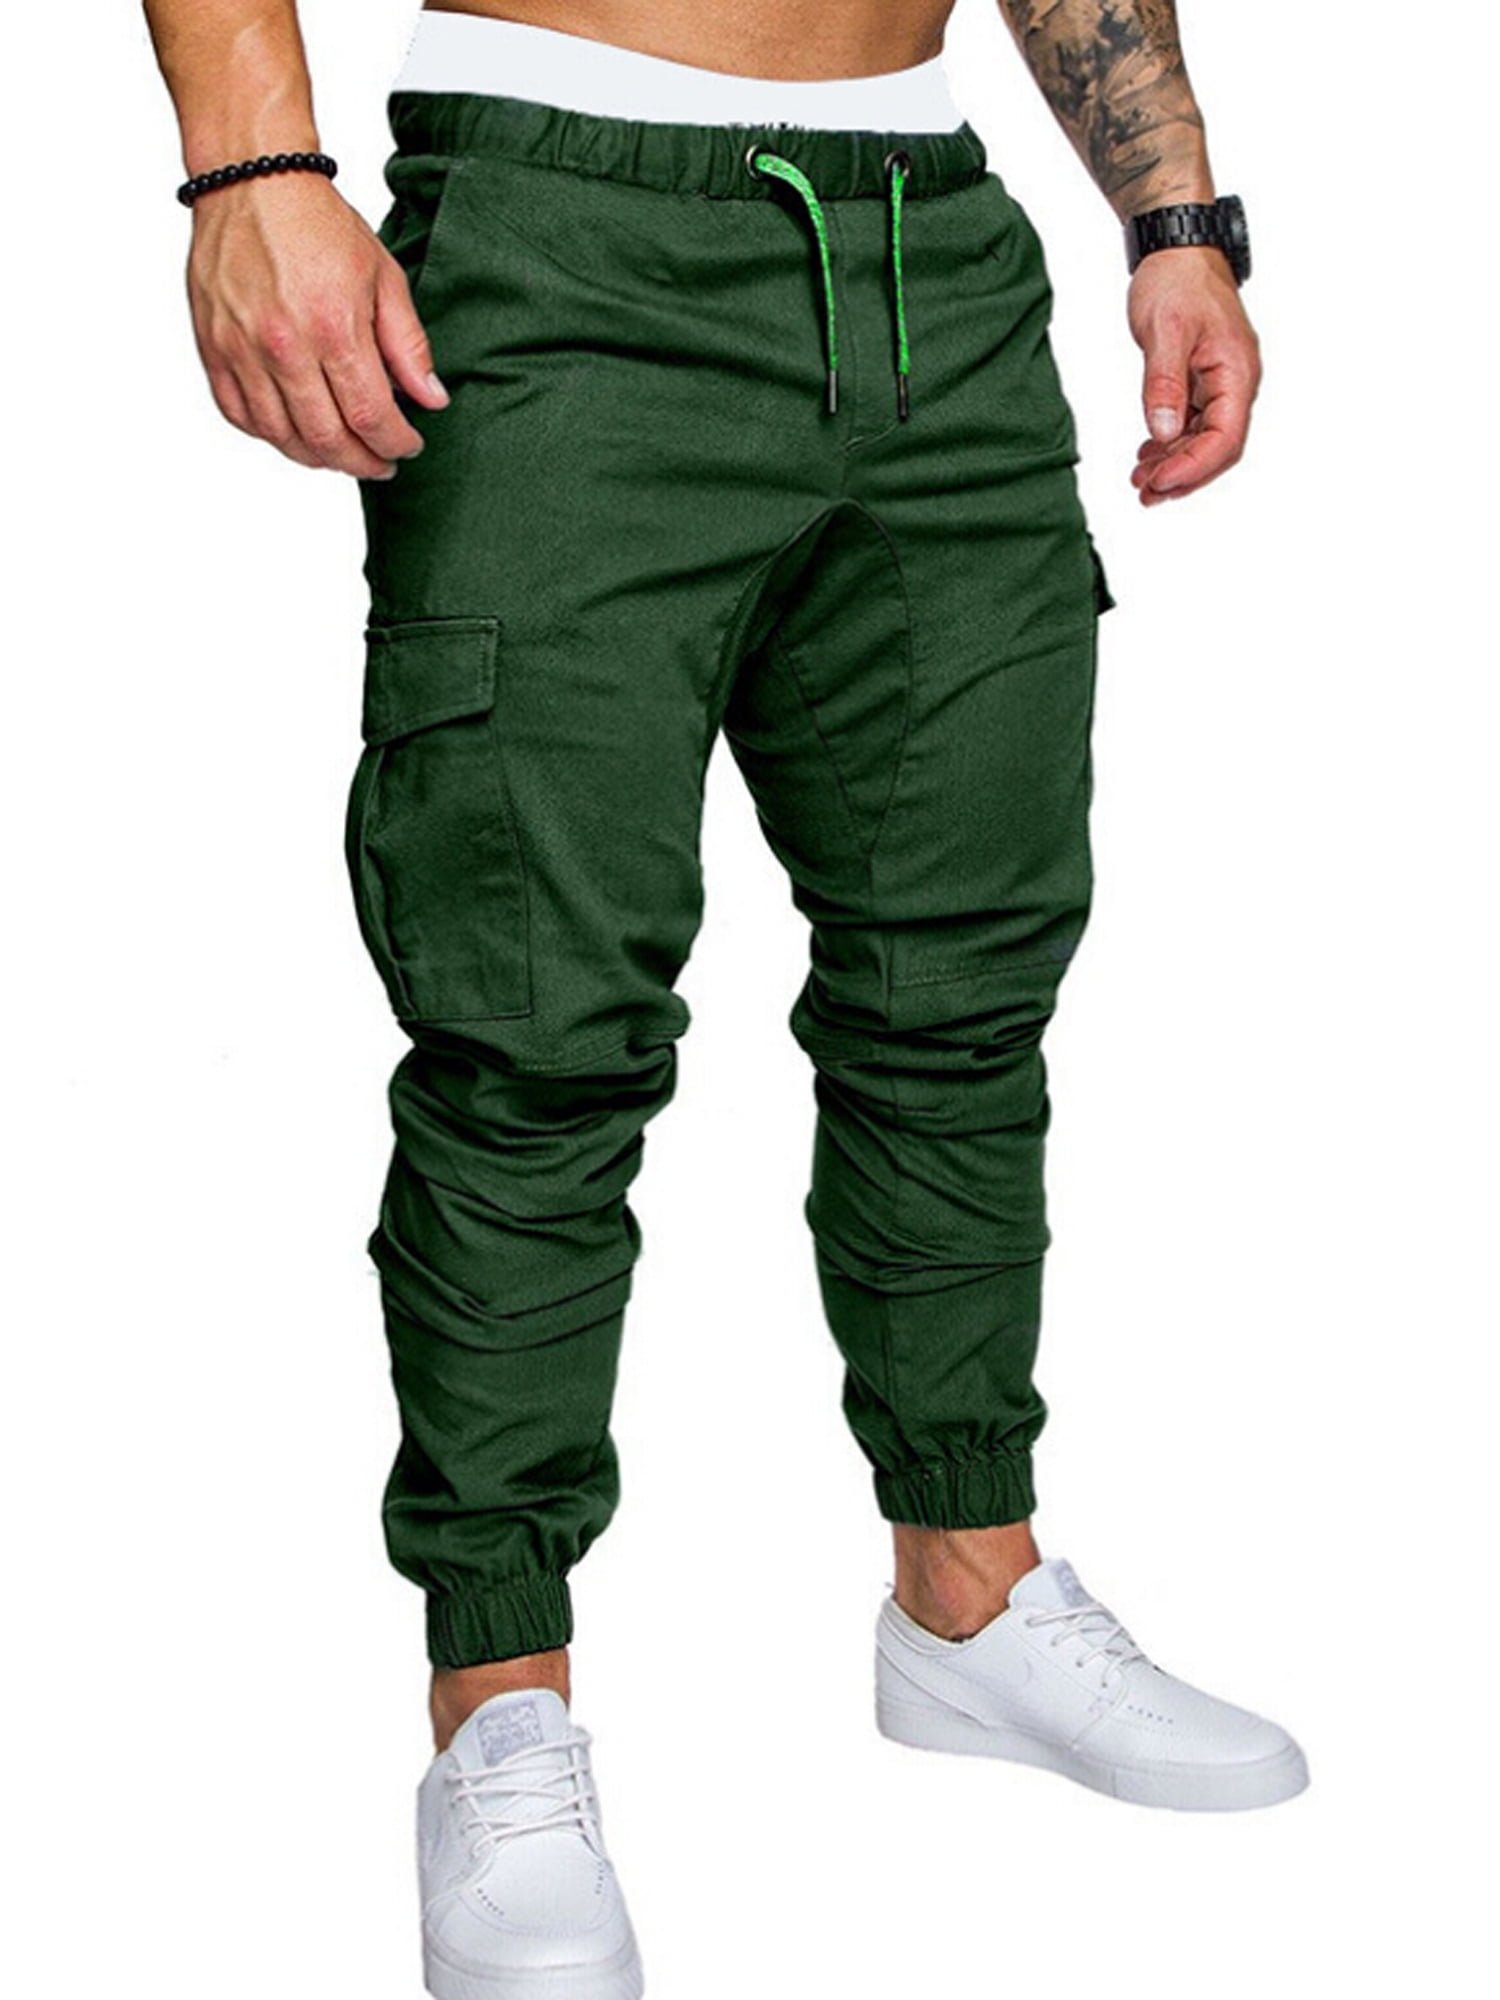 Mens Designer Chinos Stretch Cuffed Joggers Pants Slim Fit Jeans All Waist Sizes 